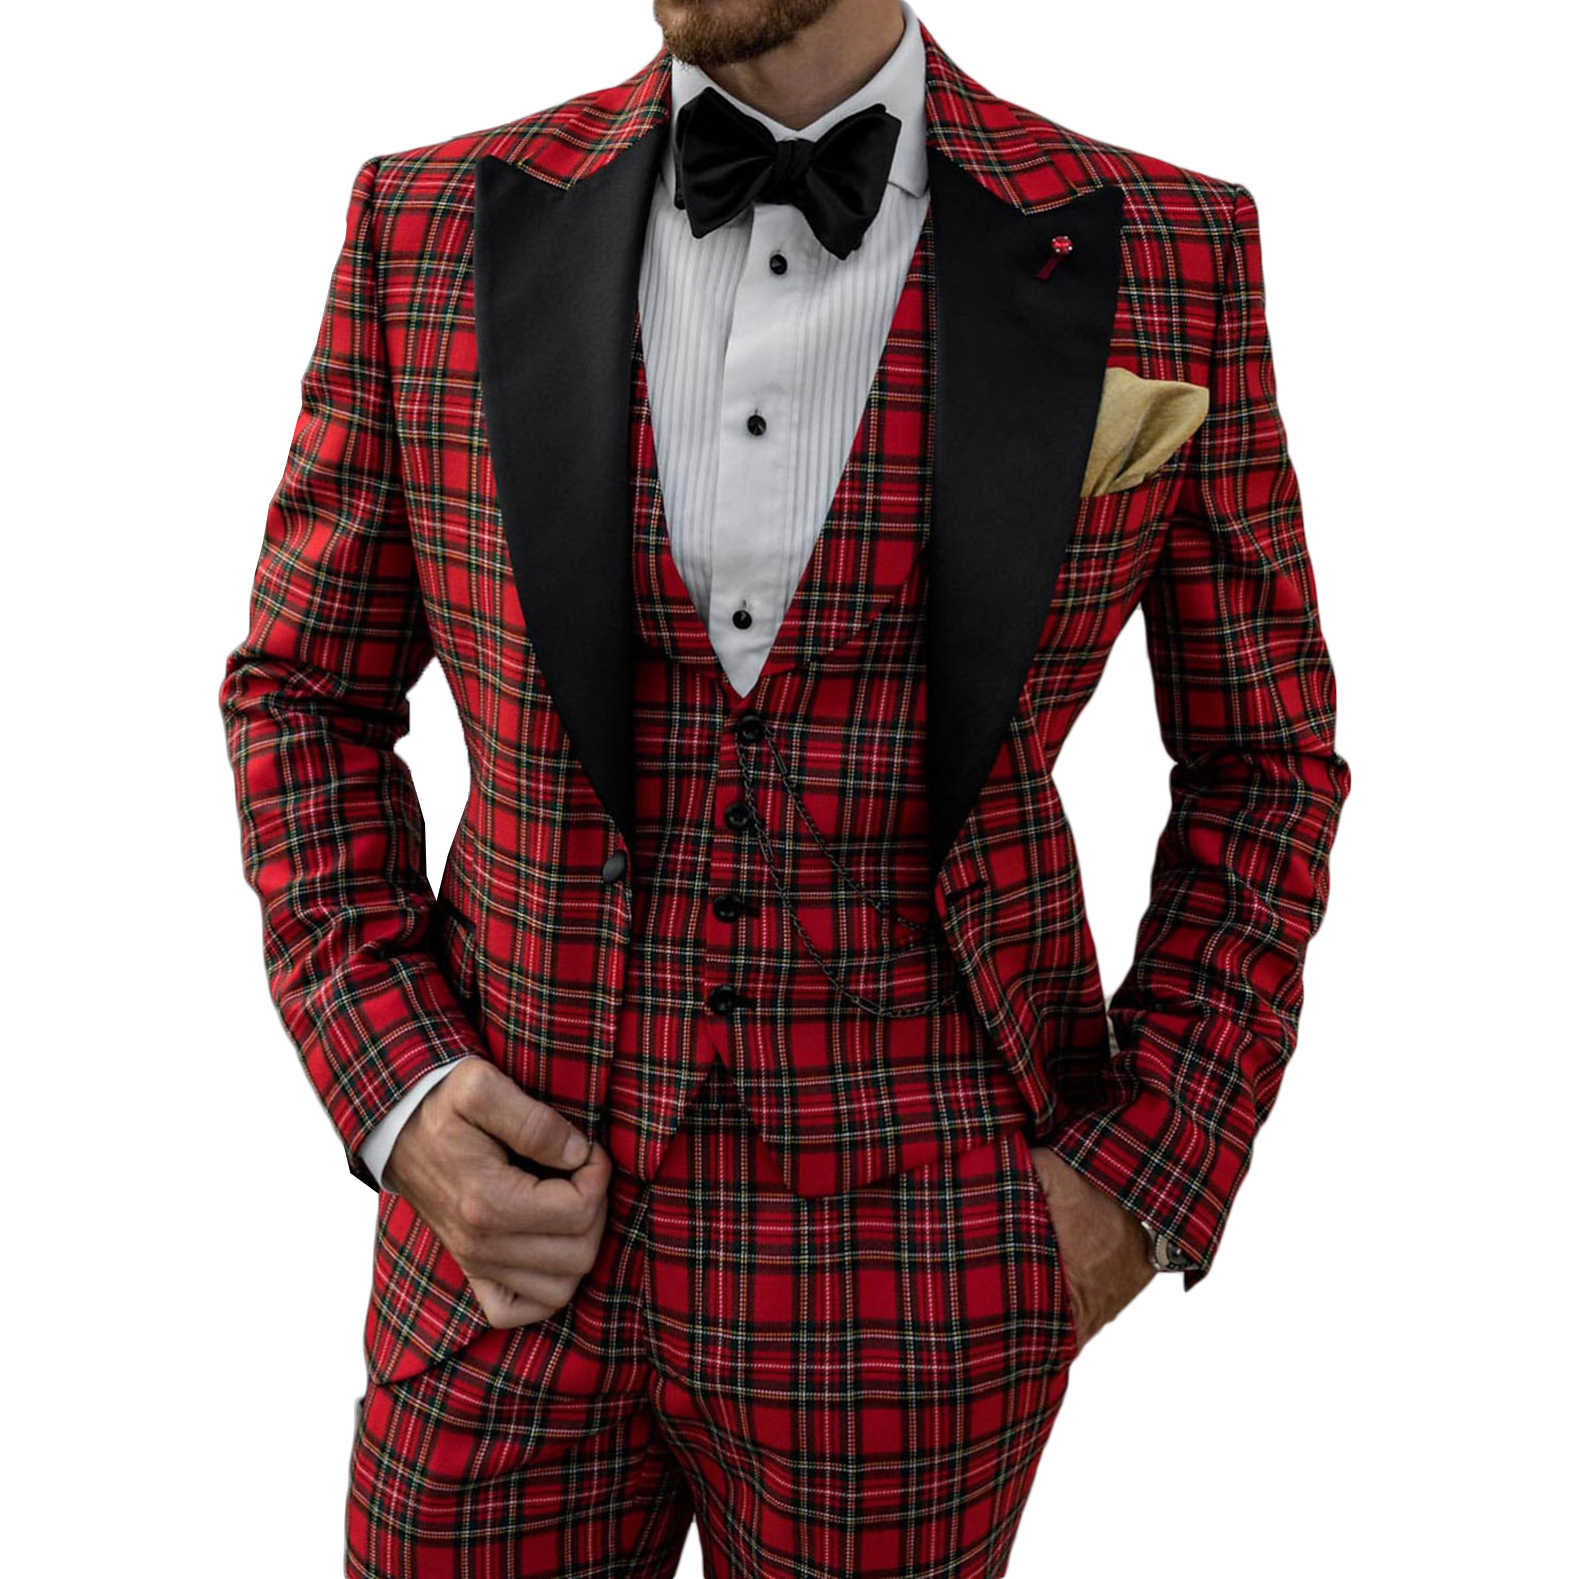 Wedding Tuxedos Checkered Blazer Peaked Lapel Single Breasted Vest Pockets Customize Coat Vest Pants Fashion Prom Party Occasions Tailored Exquisite